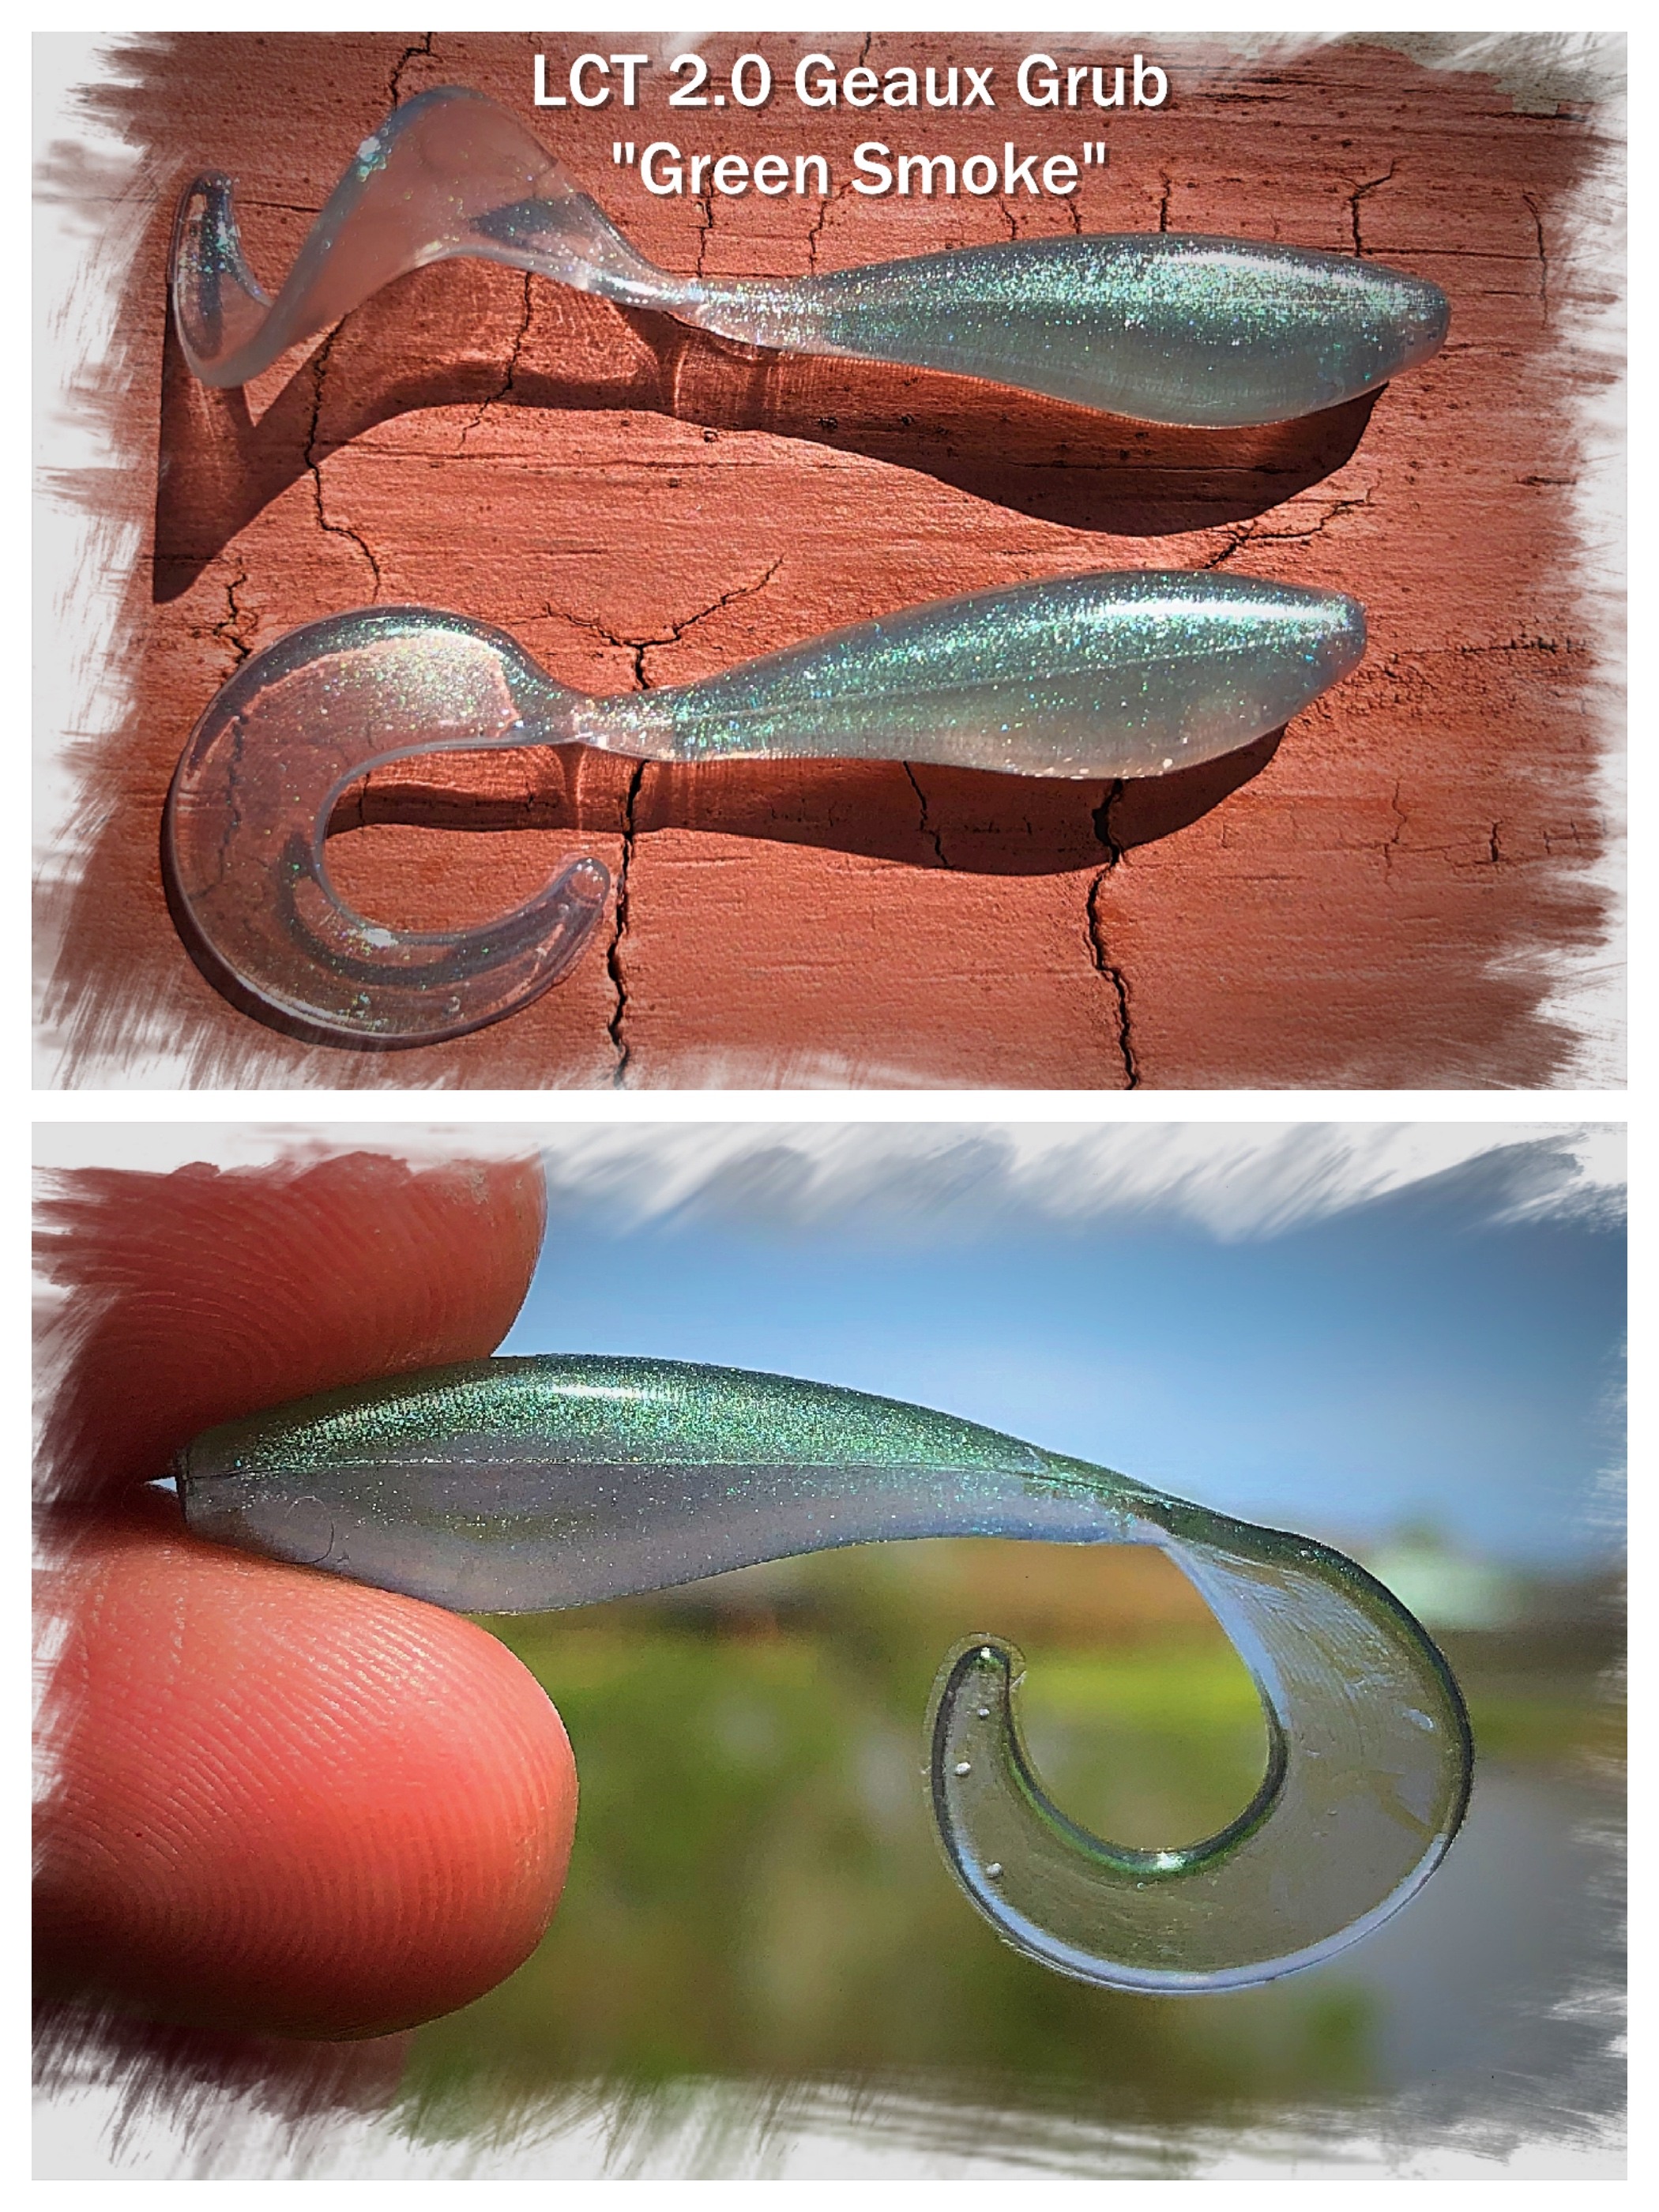 https://legacycustomtackle.com/wp-content/uploads/2019/02/LCT-2.0-Geaux-Grub-Green-Smoke-PRODUCT-PIC.jpg